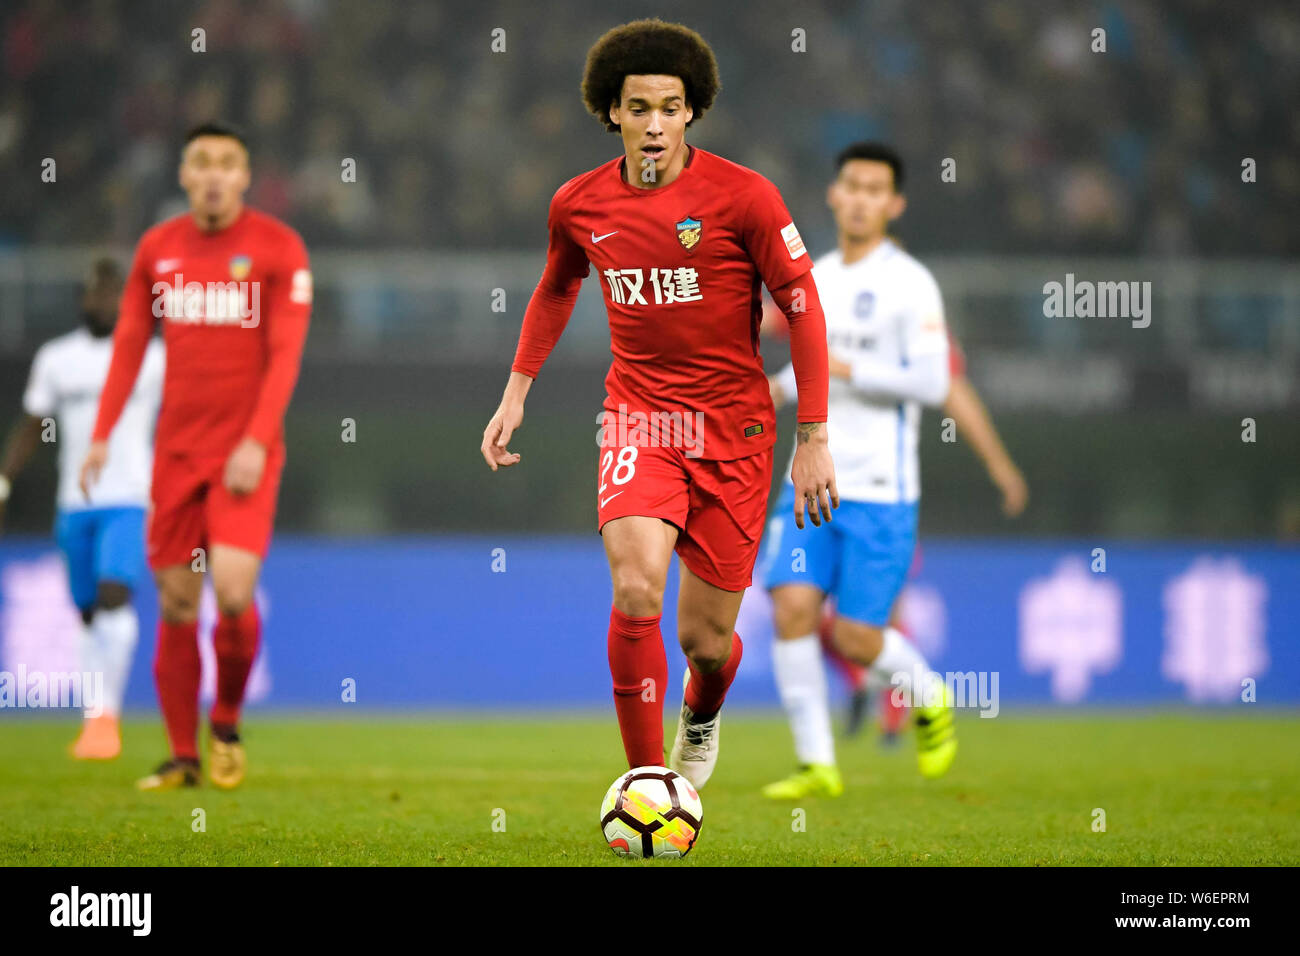 Belgian football player Axel Witsel of Tianjin Quanjian dribbles against Tianjin TEDA in their third round match during the 2018 Chinese Football Asso Stock Photo